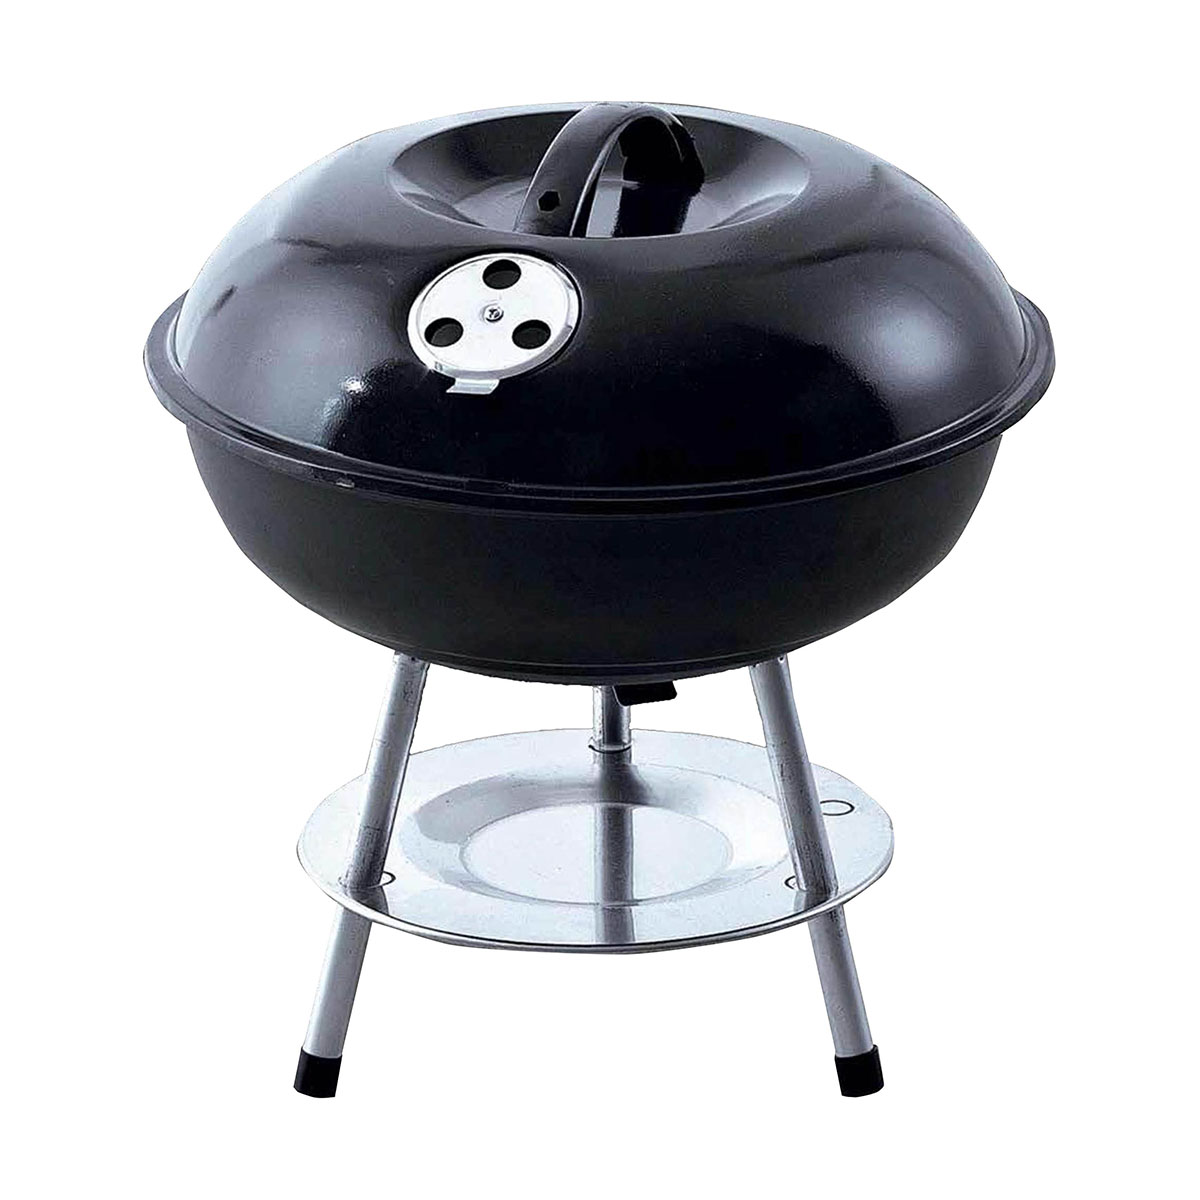 Picture of 21 Century No.14 GRILL 14 in. Portable Saucer Grill